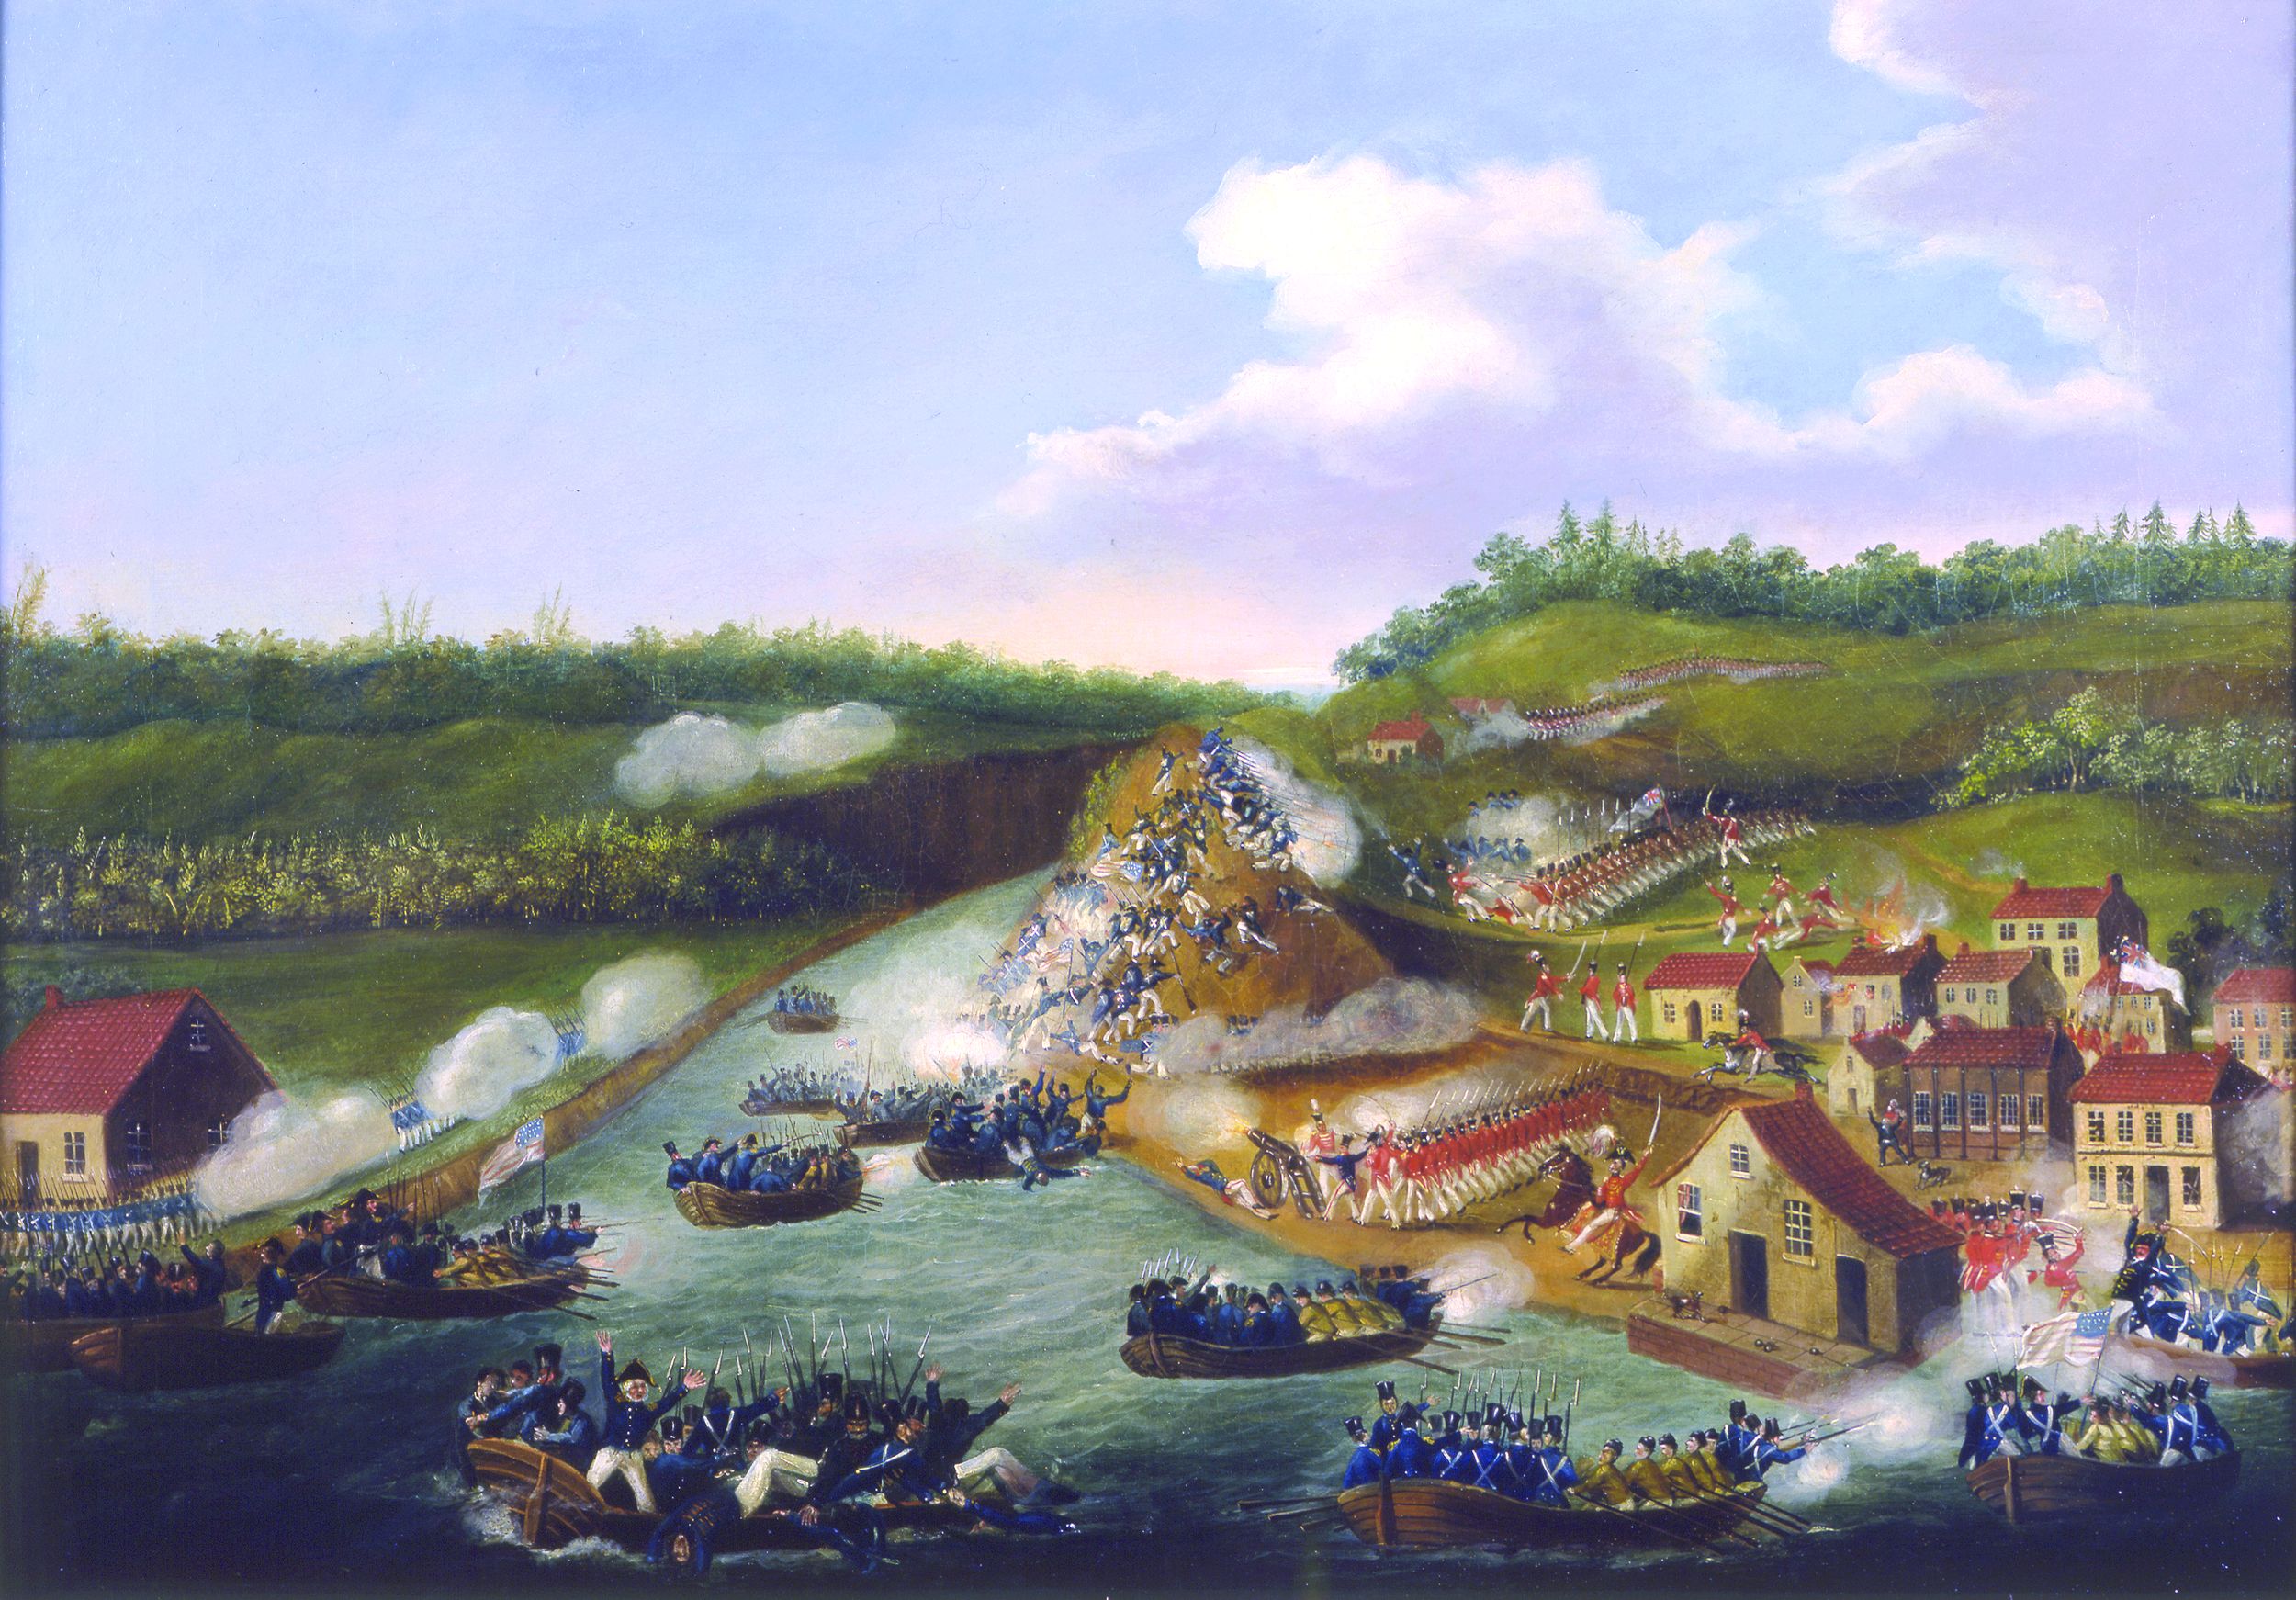 The Battle of Queenston Heights, by James B. Dennis, covers all aspects of the battle. Dennis, who took part in the fighting, may have directed another artist’s interpretation.